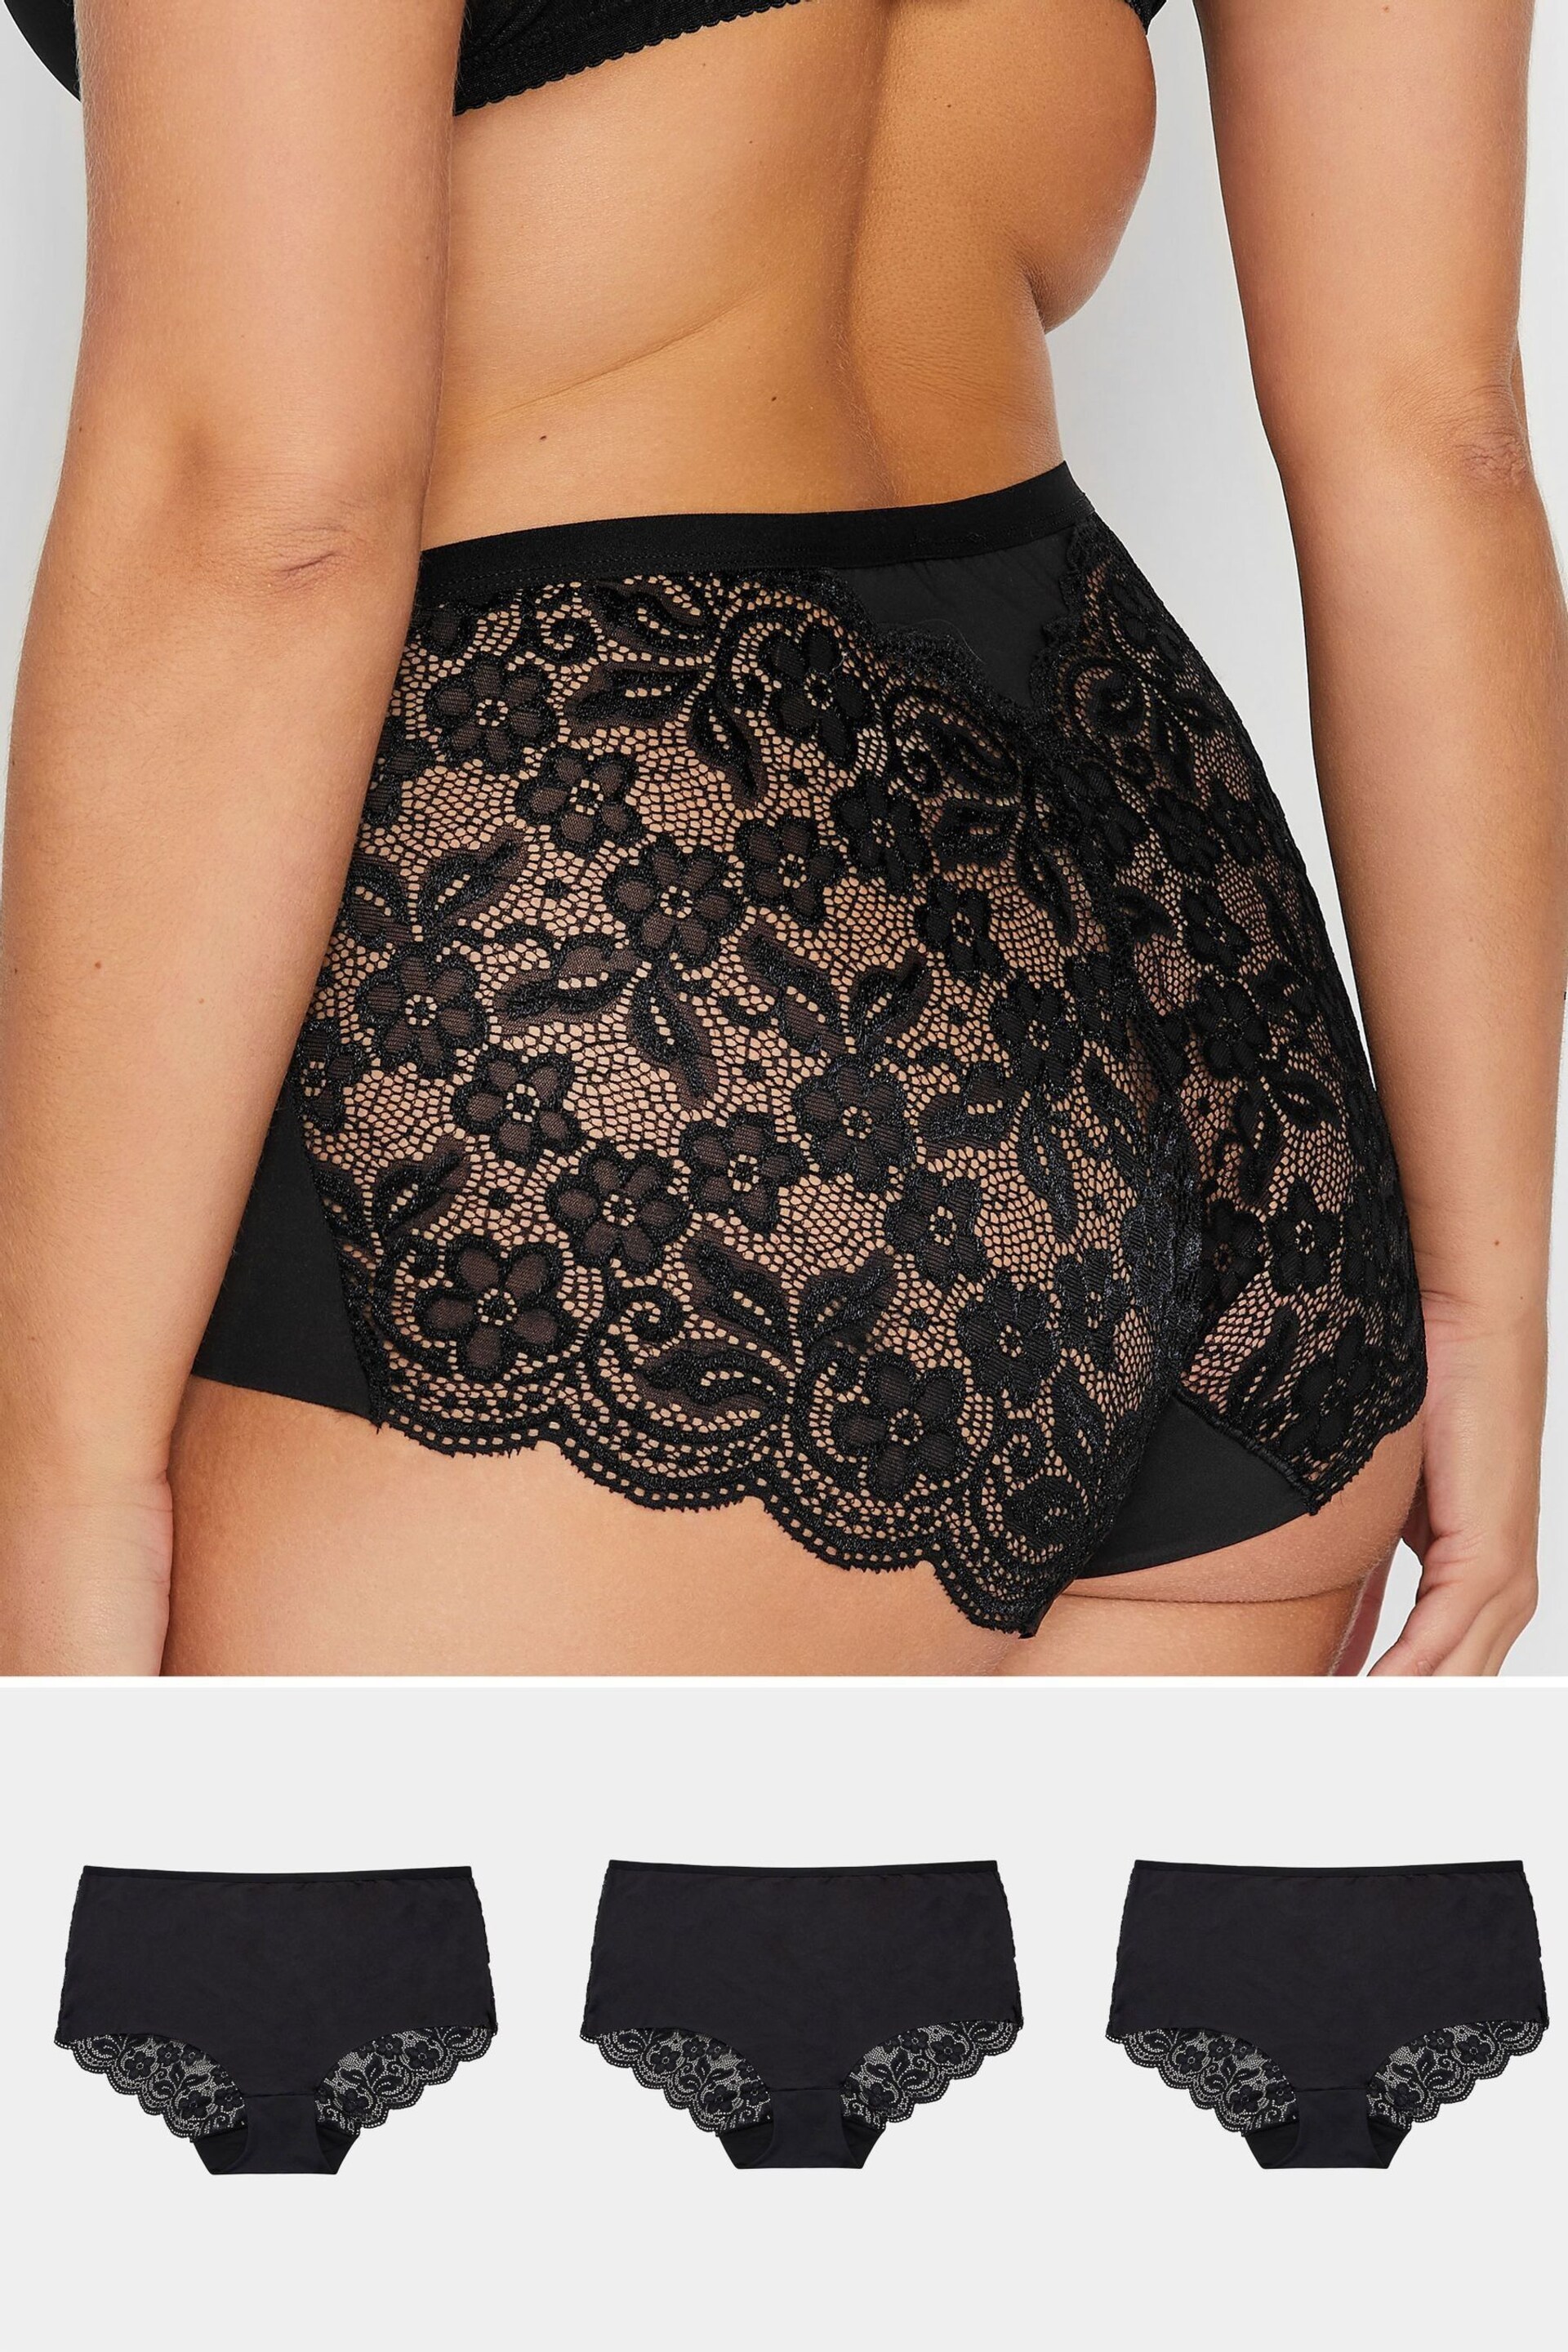 Yours Curve Black 3 Pack Lace Back Knickers - Image 1 of 4